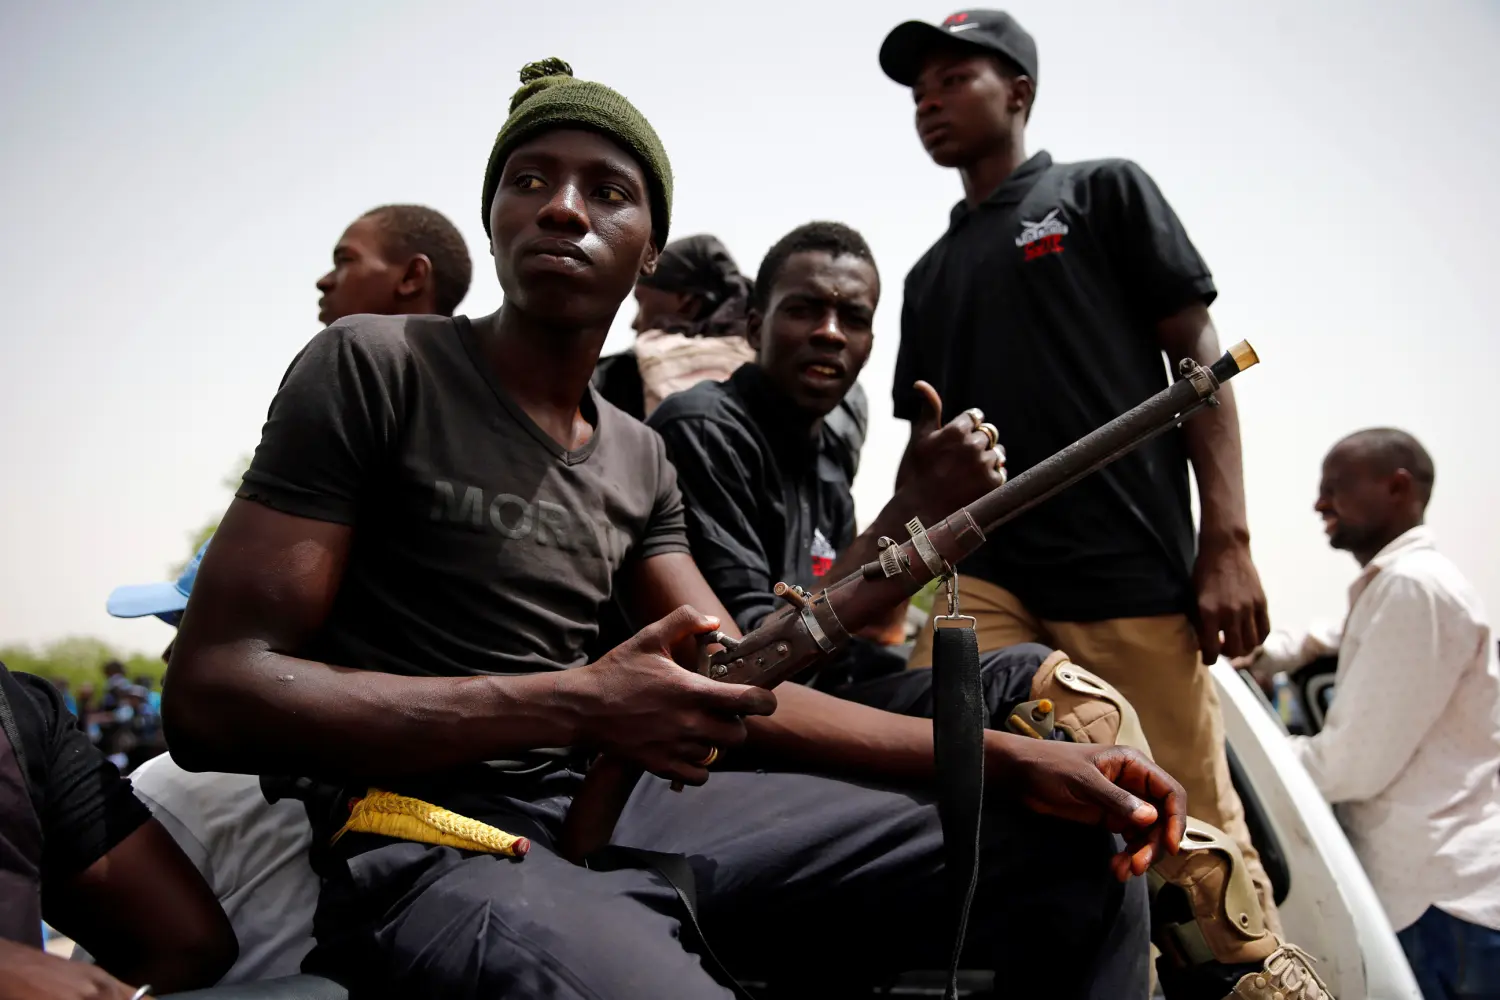 DATE IMPORTED: June 15, 2017 Members of the local militia, otherwise known as CJTF, sit in the back of a truck during a patrol in the city of Maiduguri, northern Nigeria June 9, 2017. Picture taken June 9, 2017. REUTERS/Akintunde Akinleye.